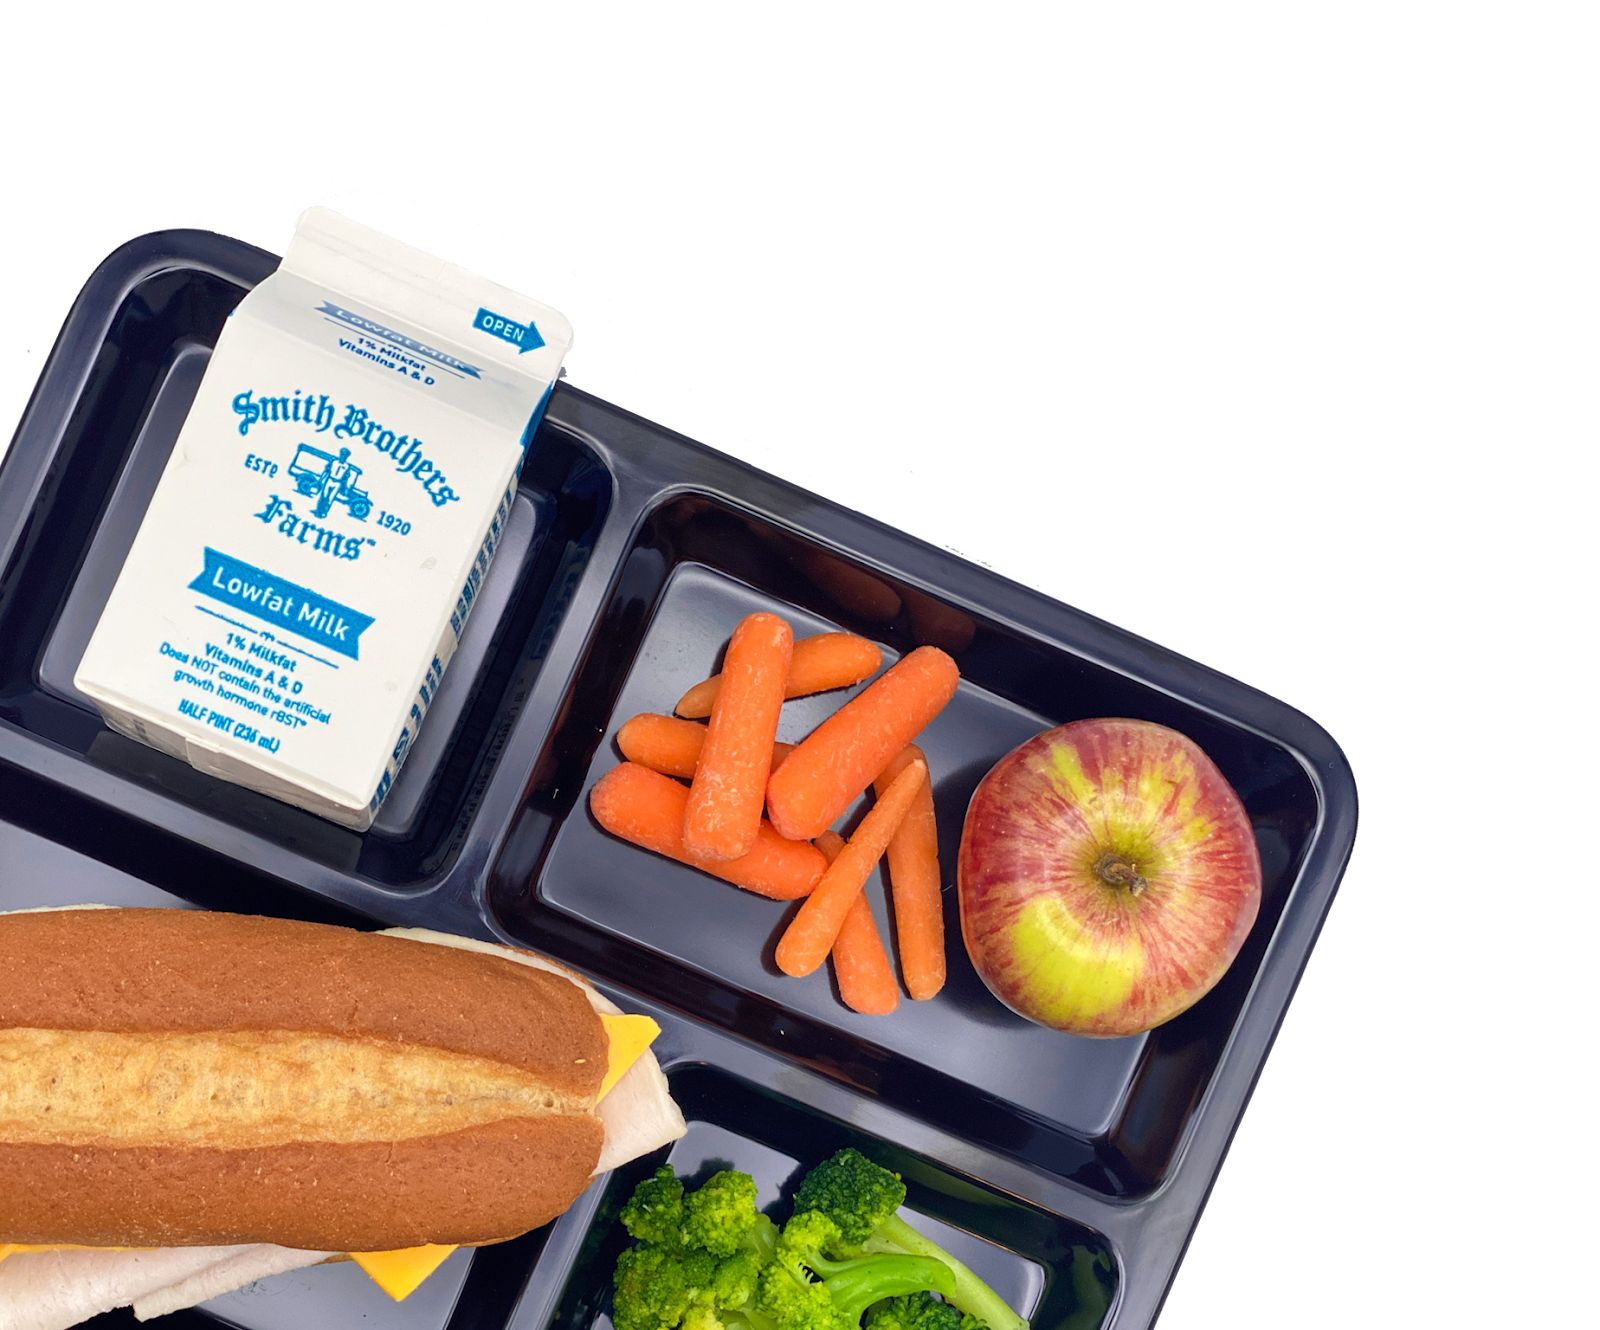 Photo of school meal try with a sandwich, milk, baby carrots, apple, and broccoli